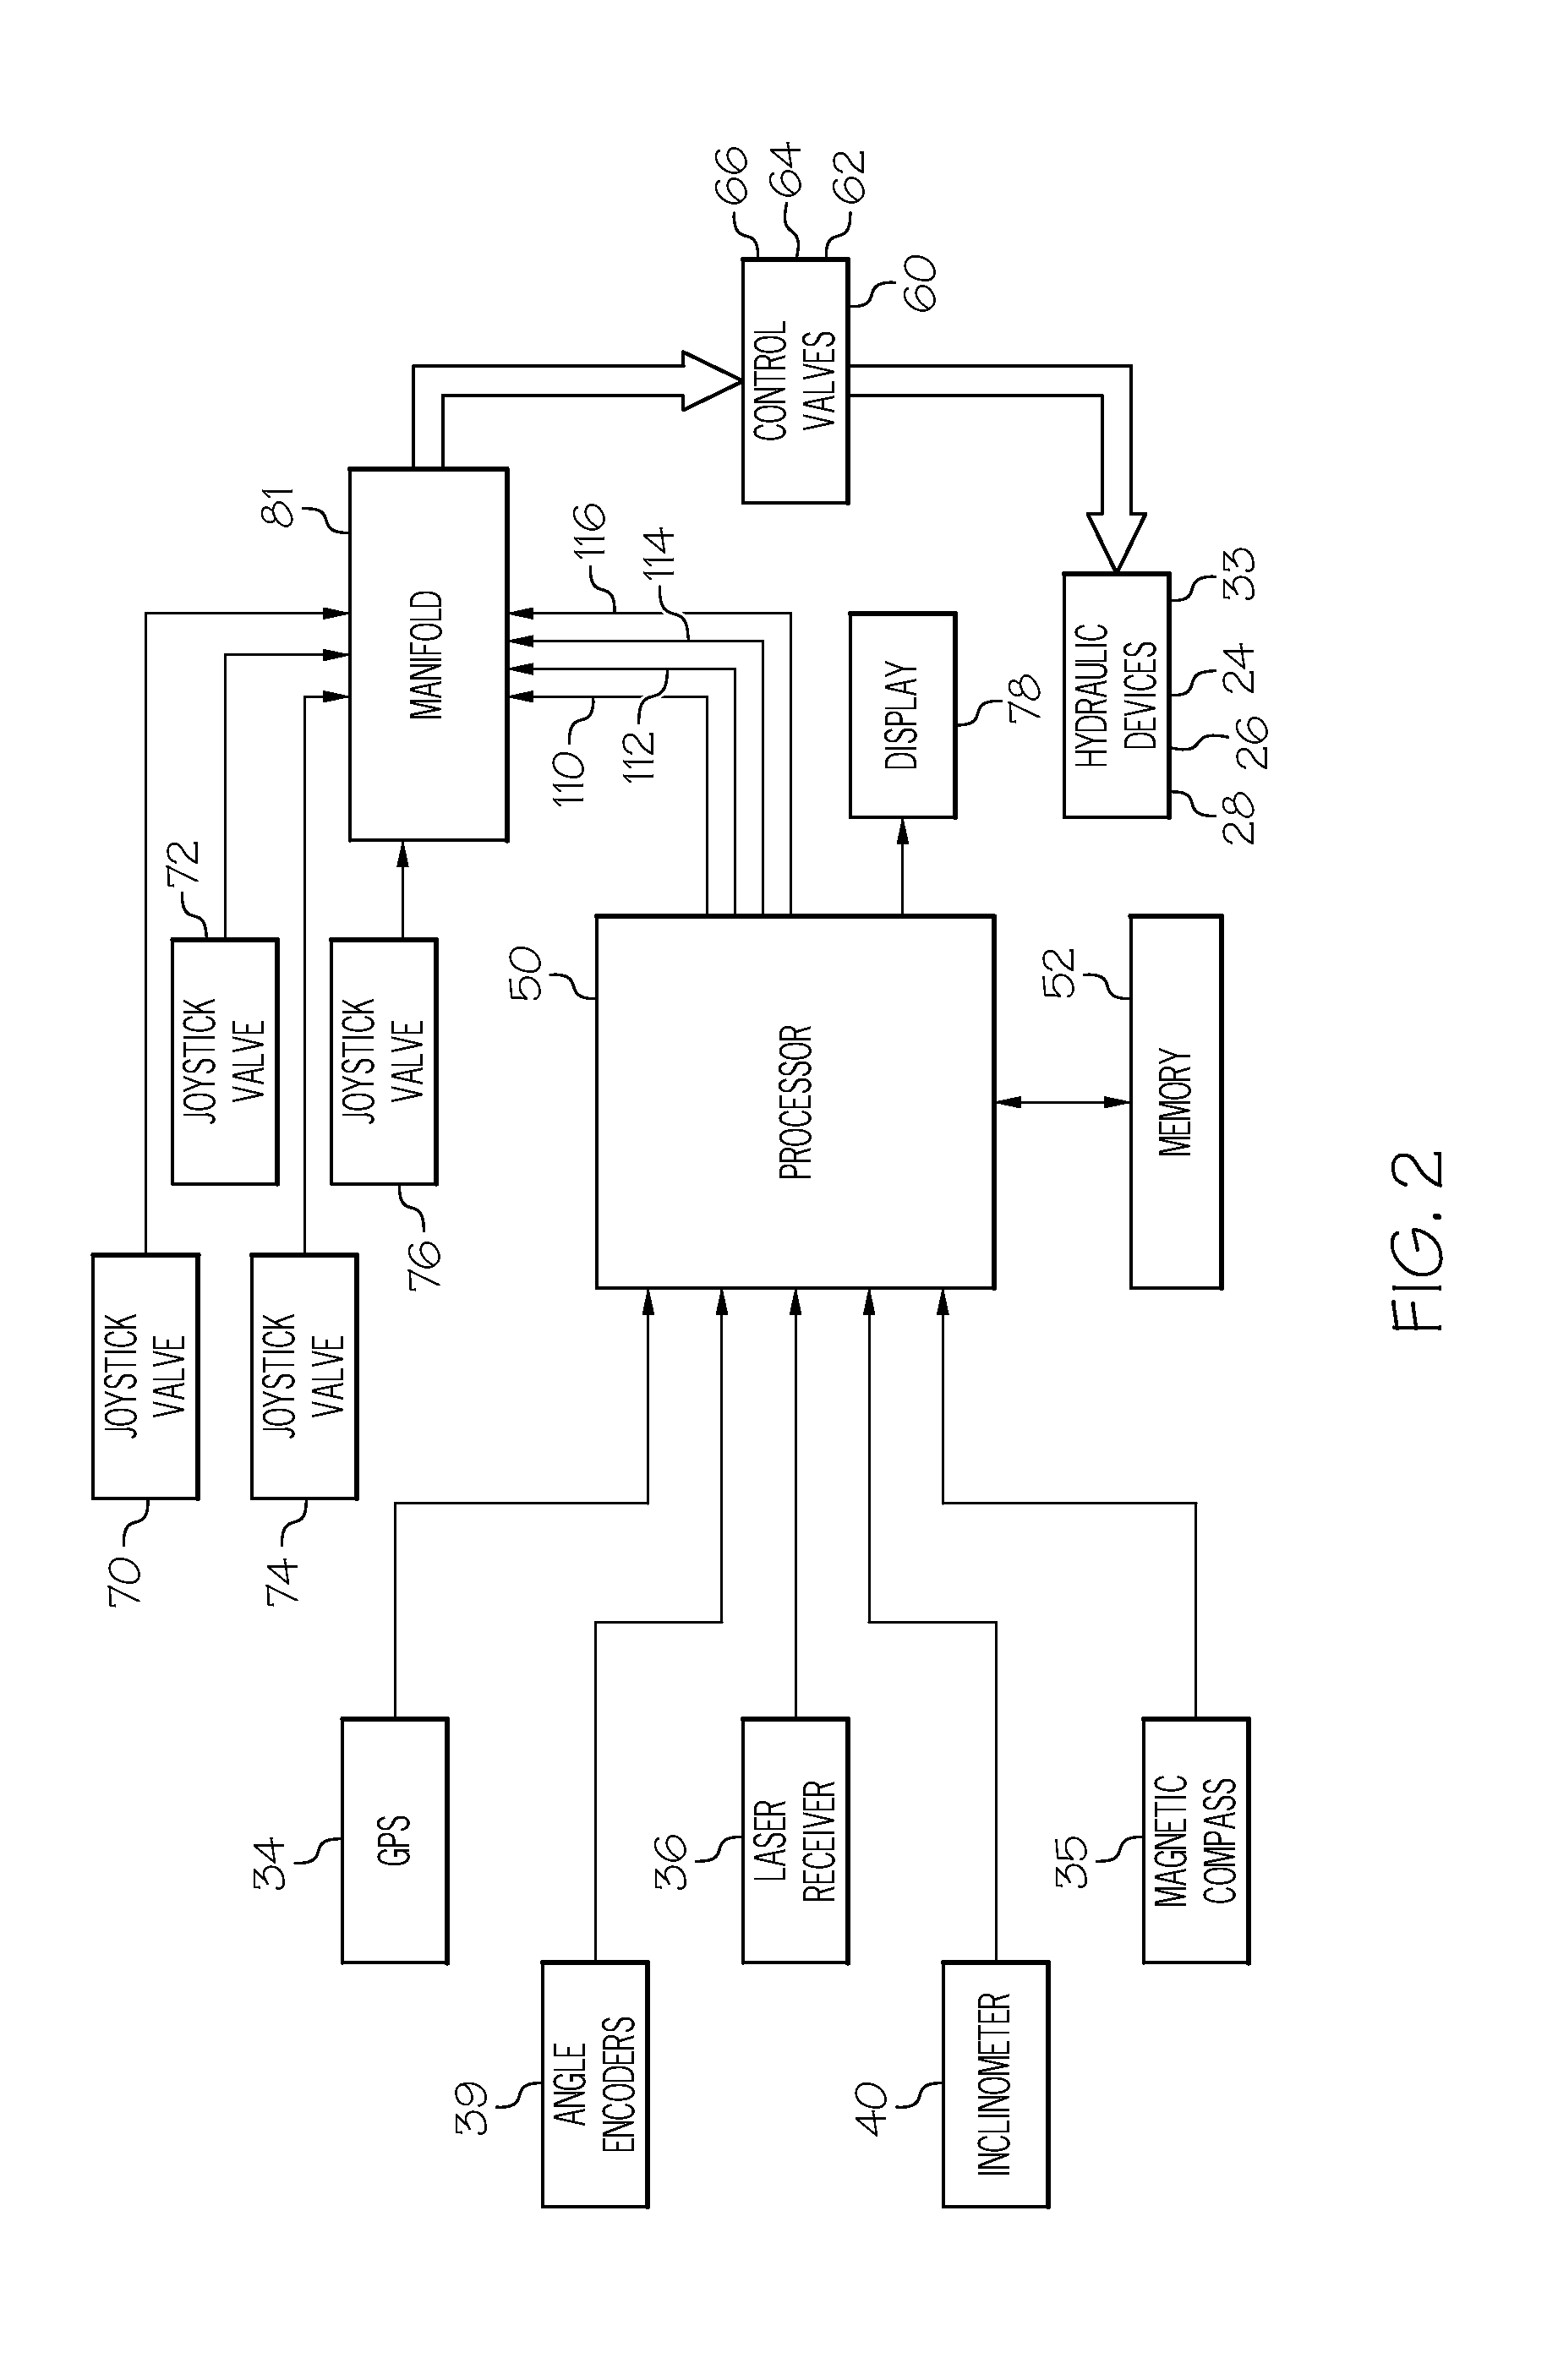 Method and system for controlling an excavator